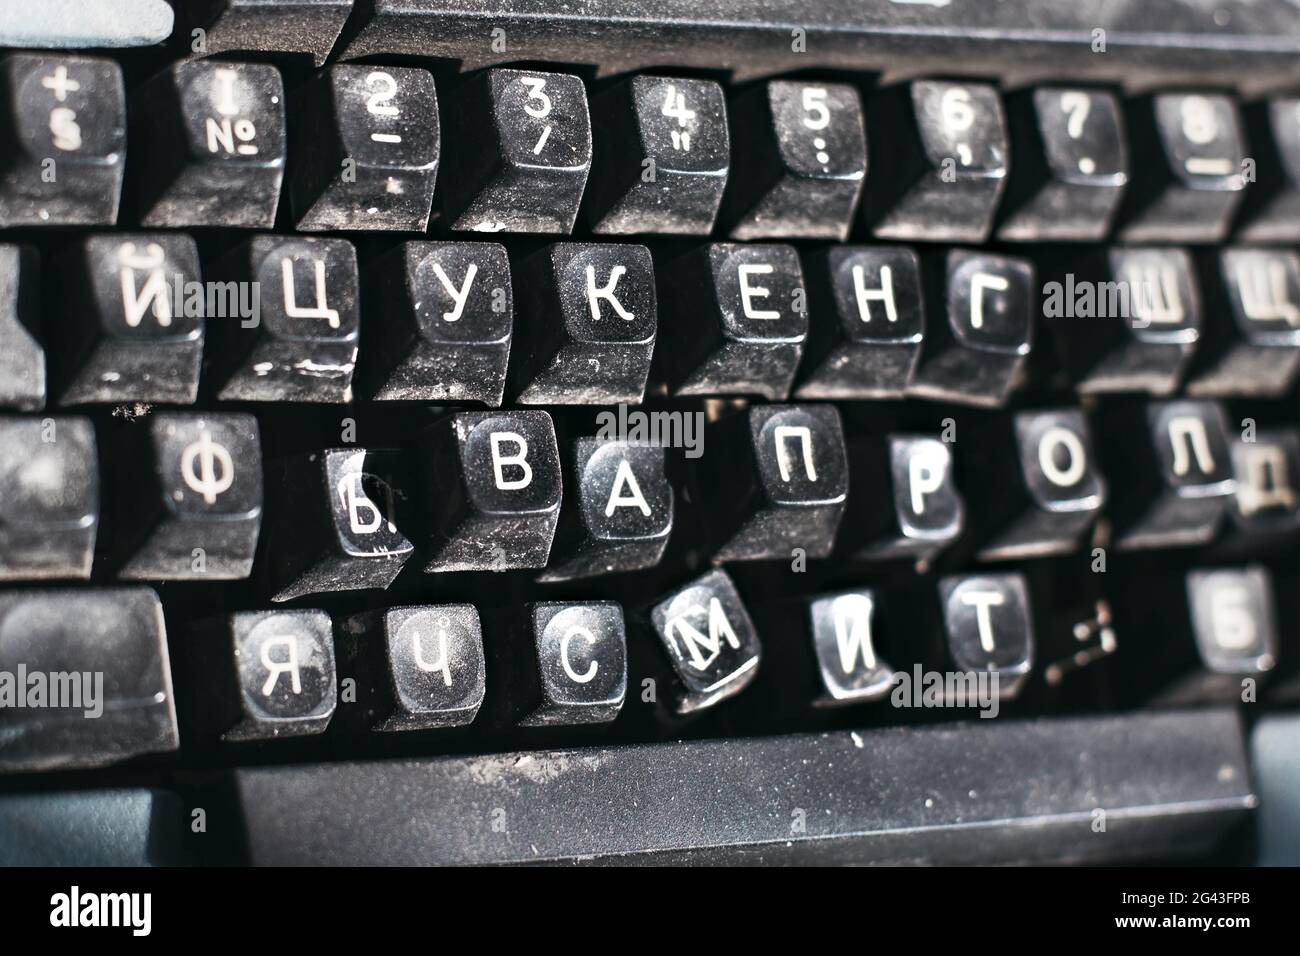 Outdated typewriter close-up. Broken keyboard with Russian letters. Stock Photo